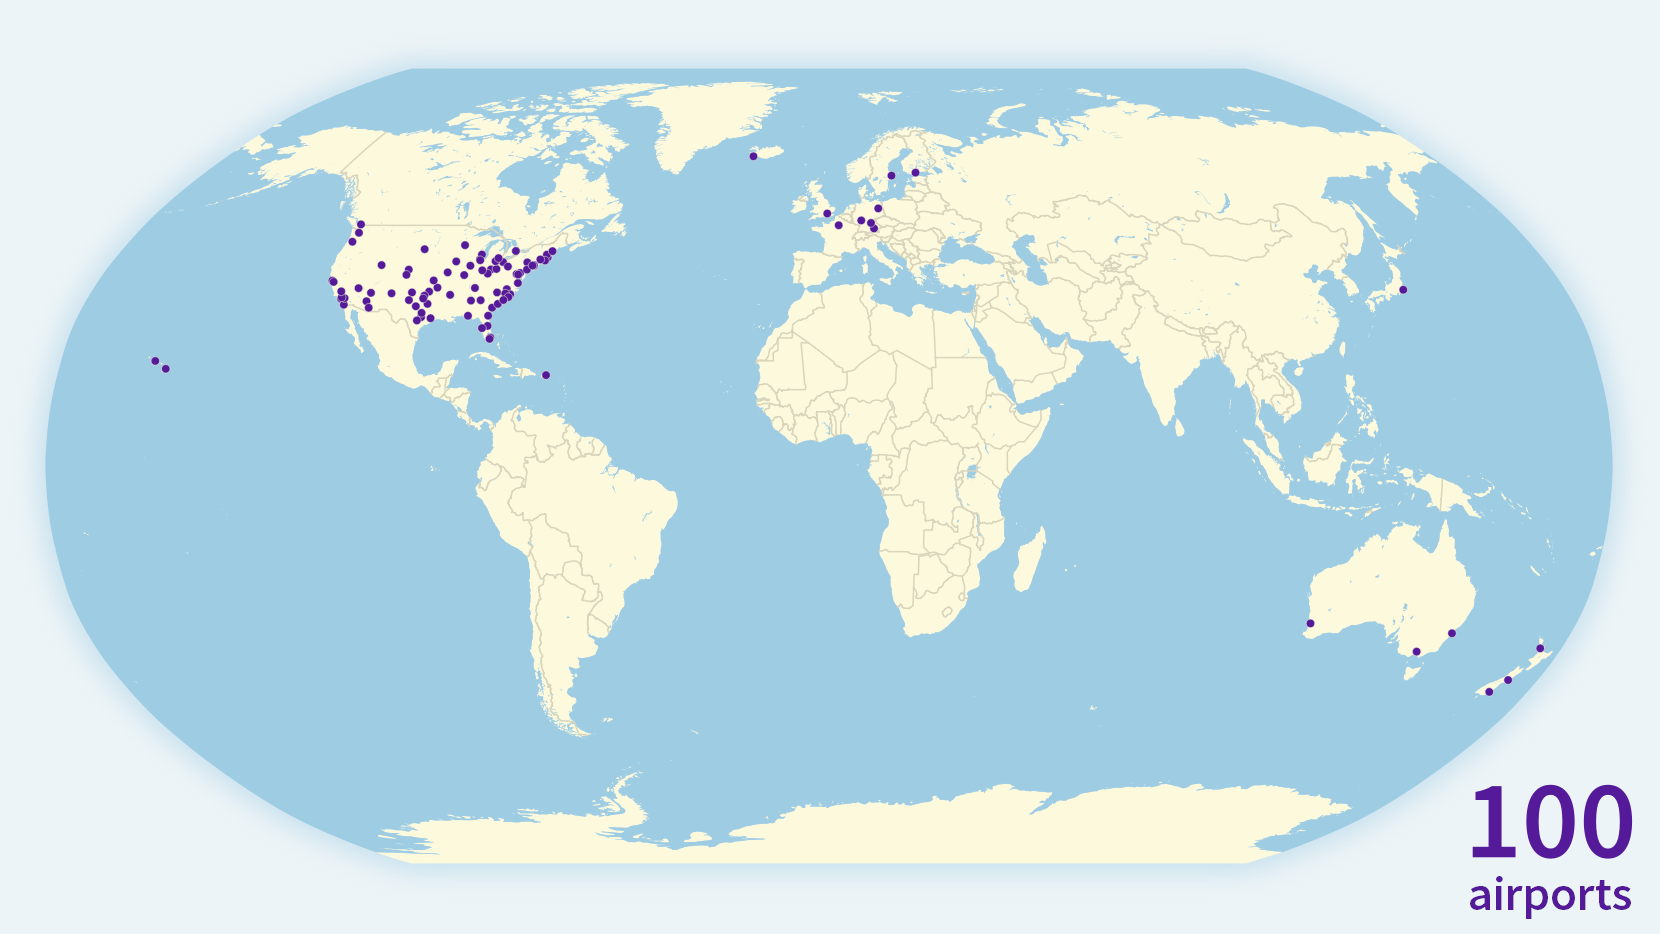 A world map showing the location of all 100 airports. The map is animated and adds one airport at a time, in the order I visited them.